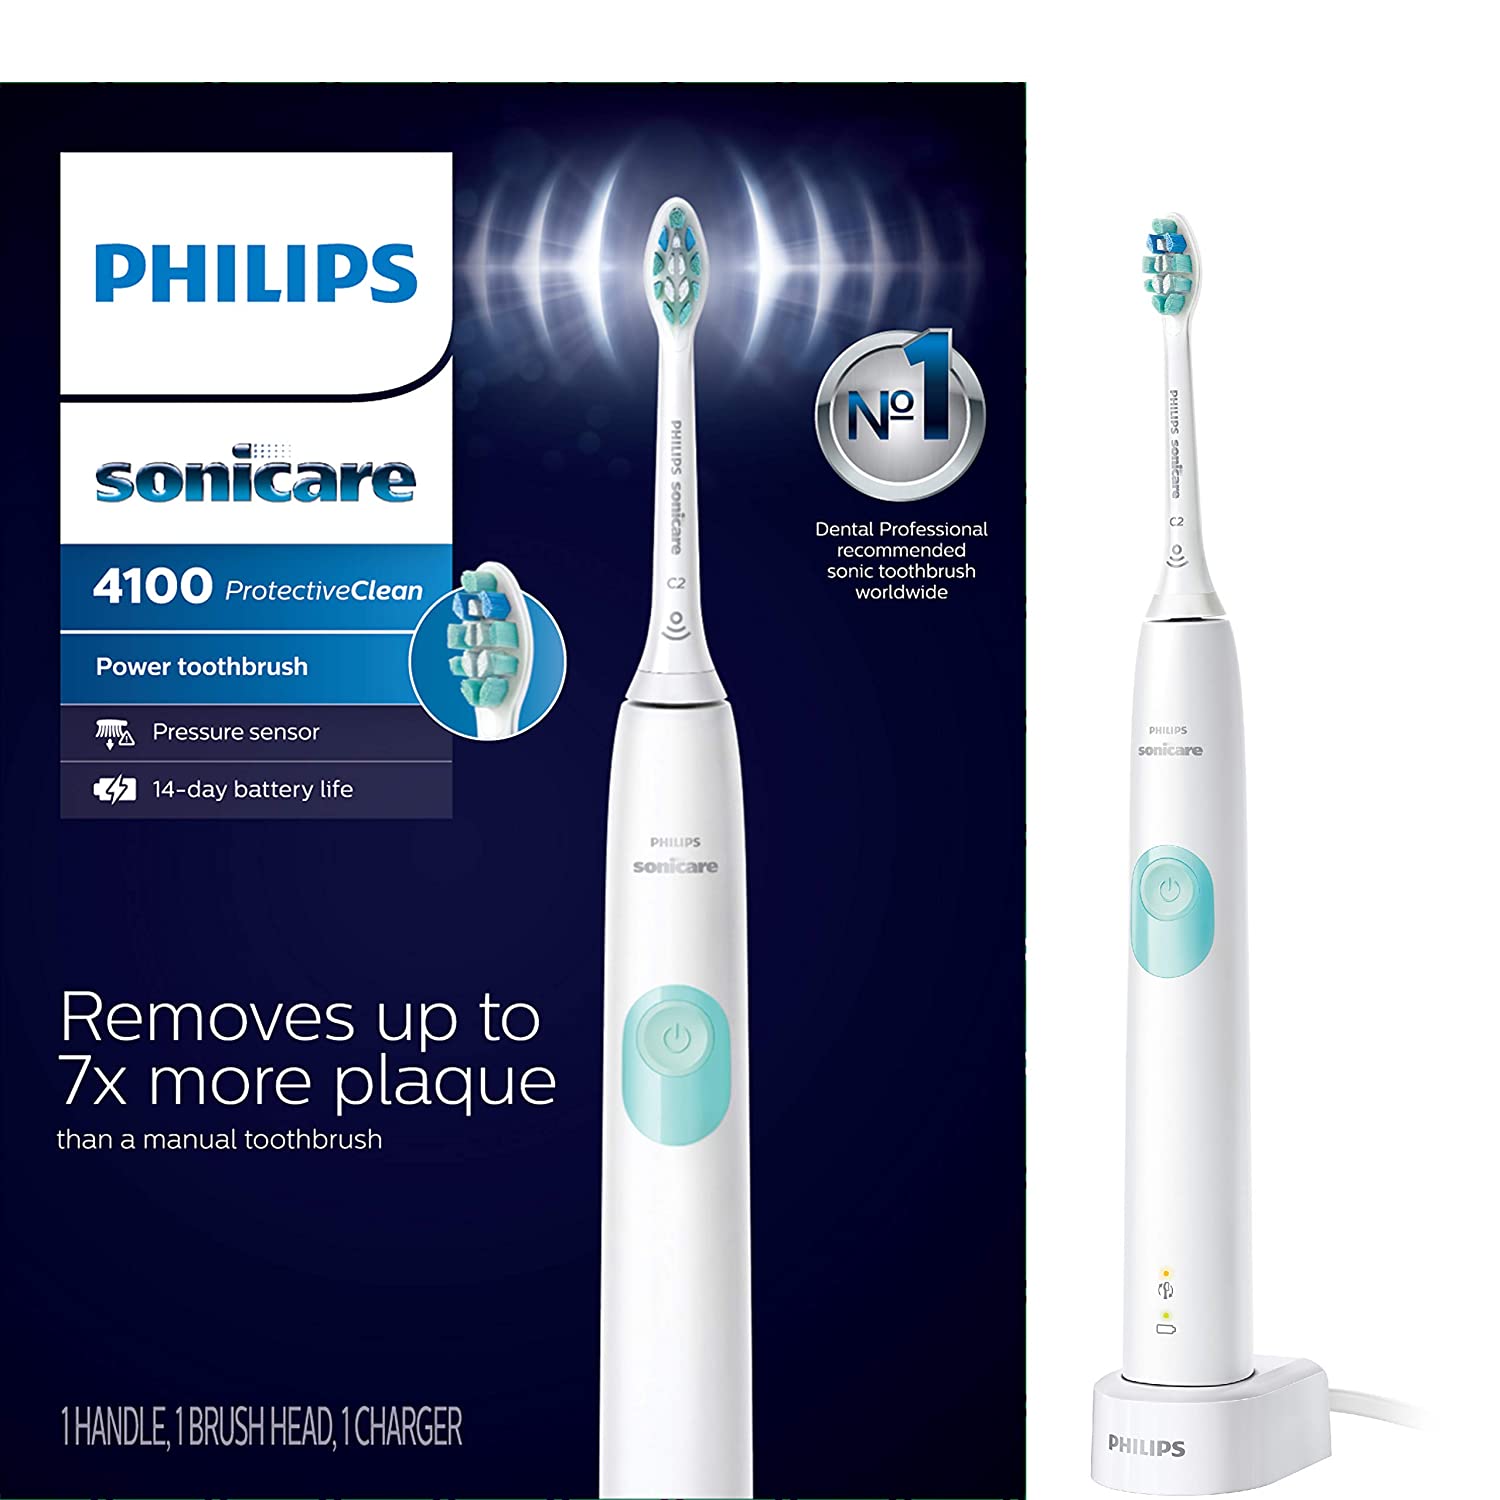 Philips Sonicare Protective Clean 4100 Rechargeable Electric Toothbrush (White, HX6817/01) $30 + Free Shipping